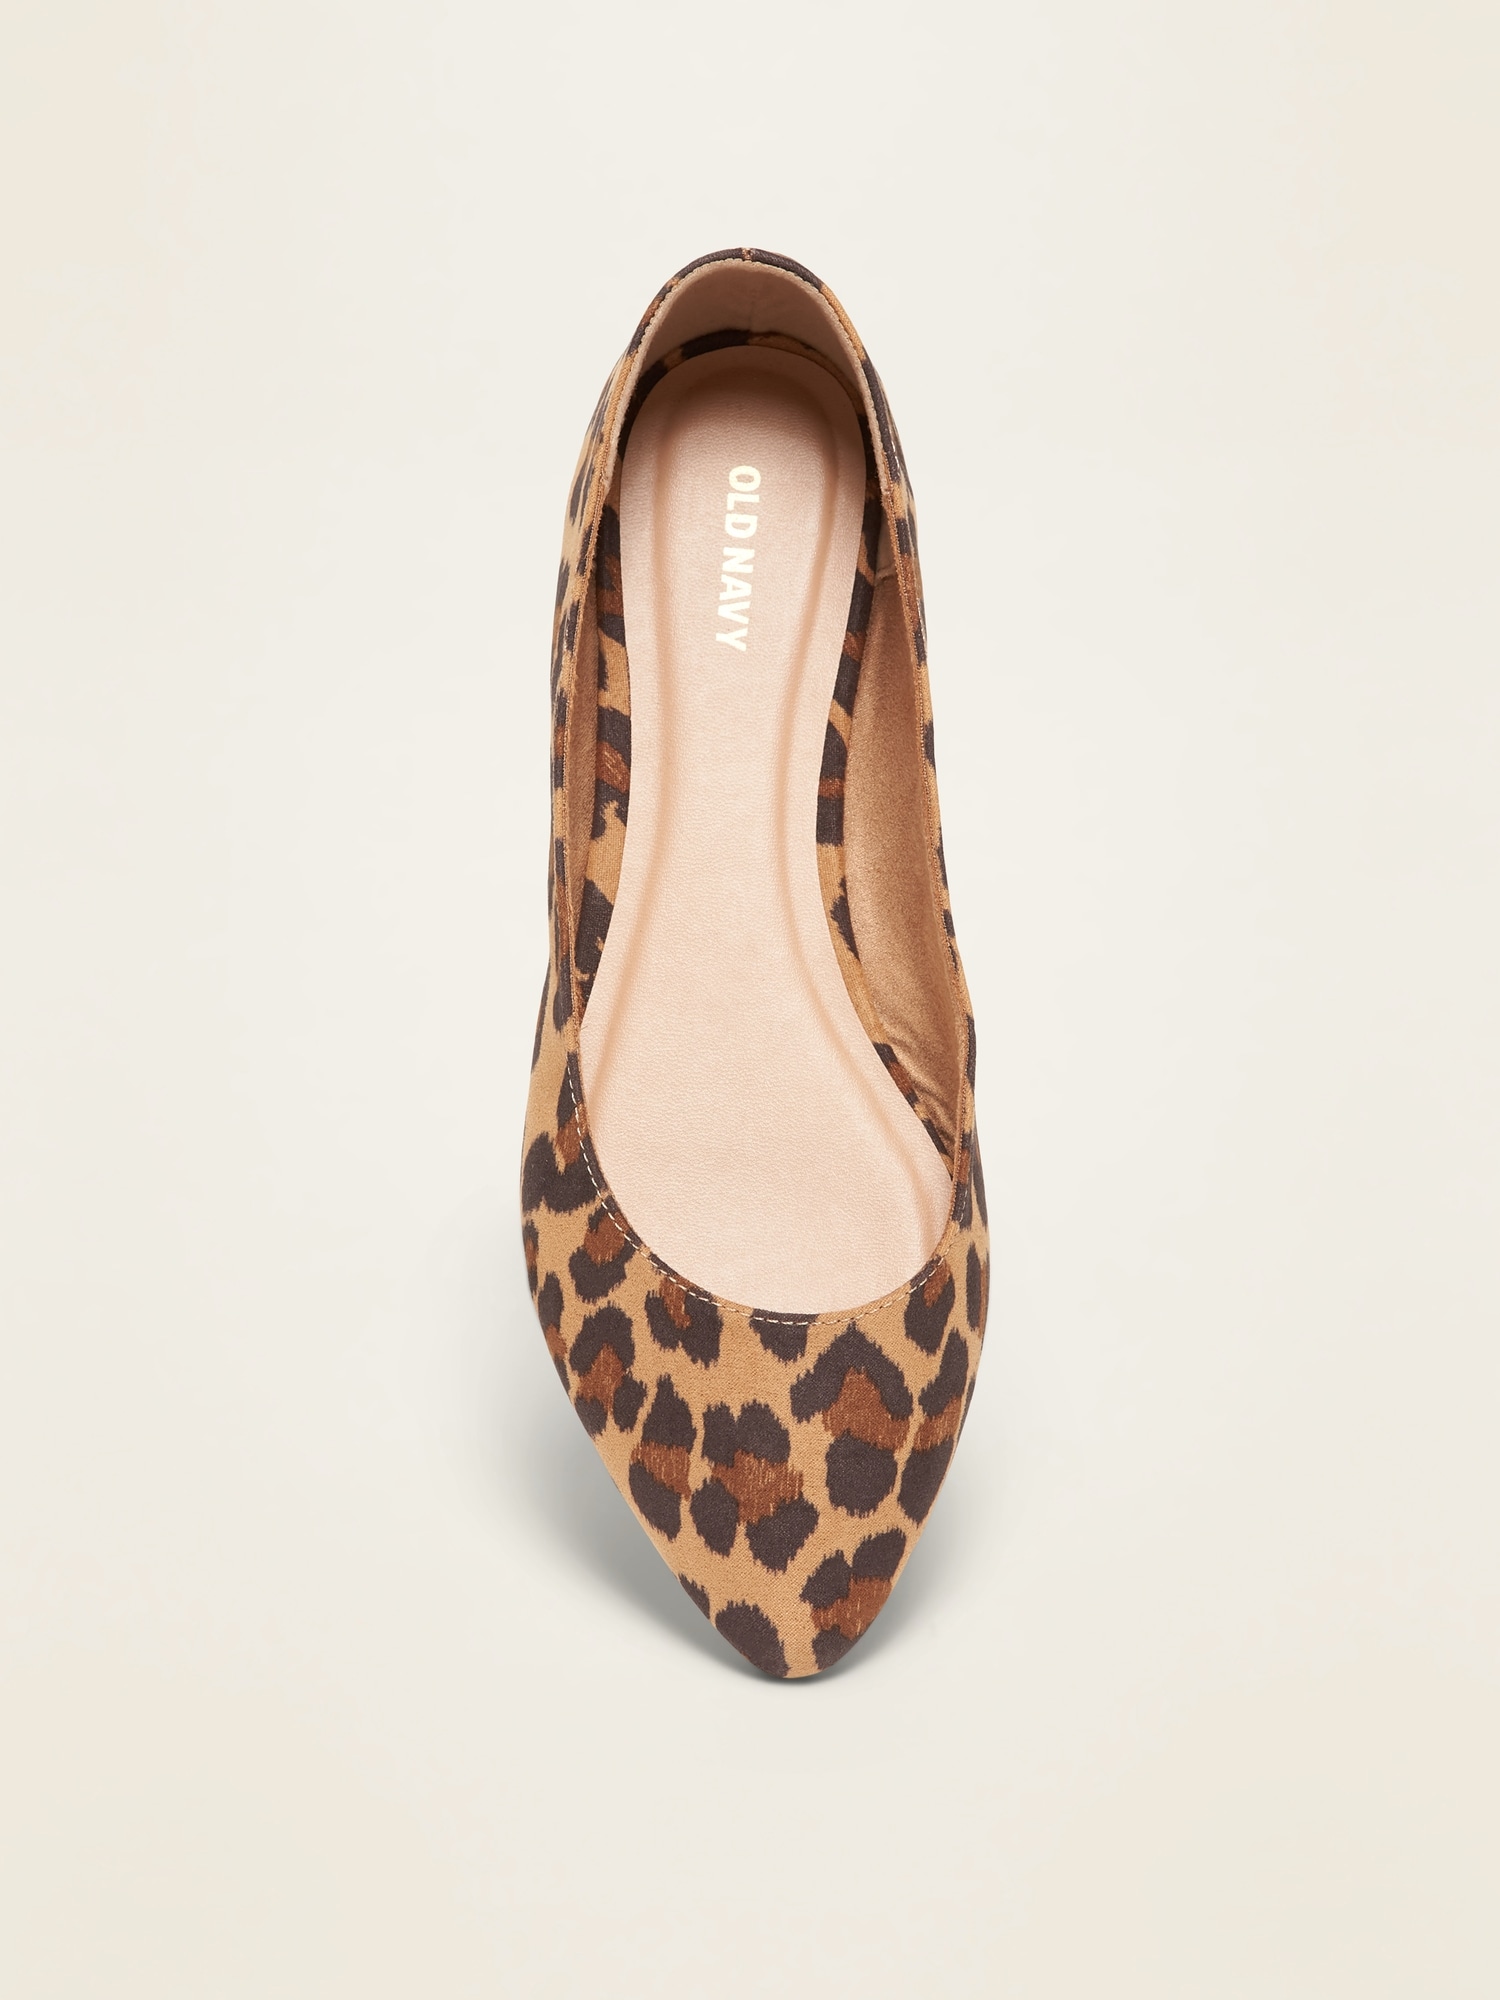 old navy womens shoes flats